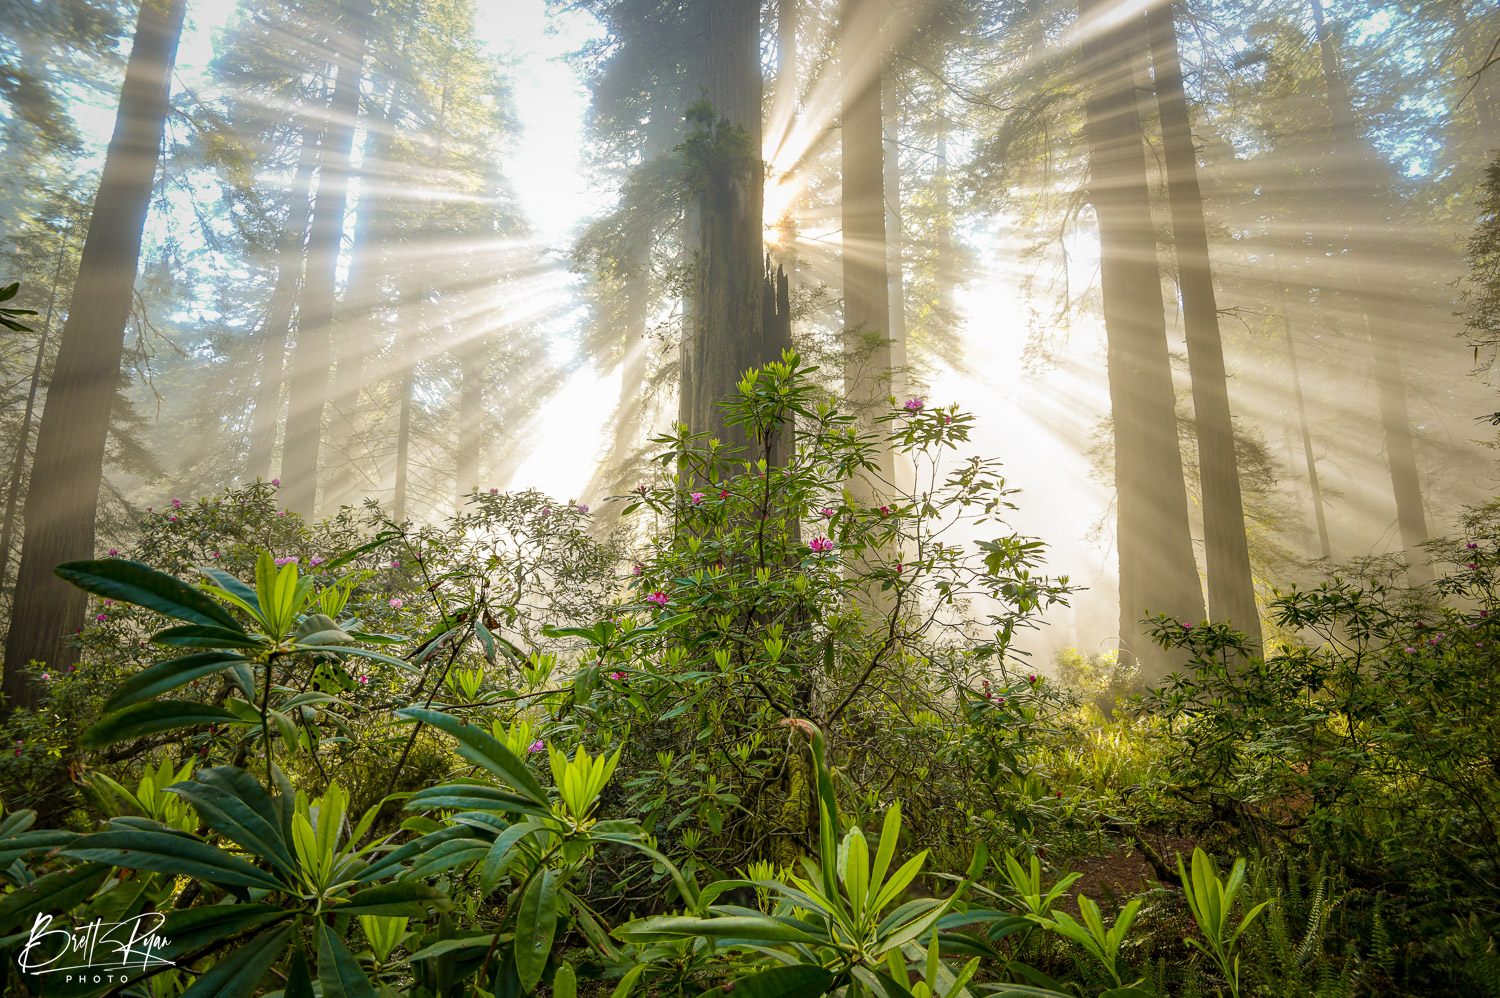 This image was captured during a beautiful spring morning in a Redwood Forest in Northern California. Limited Edition Print of...